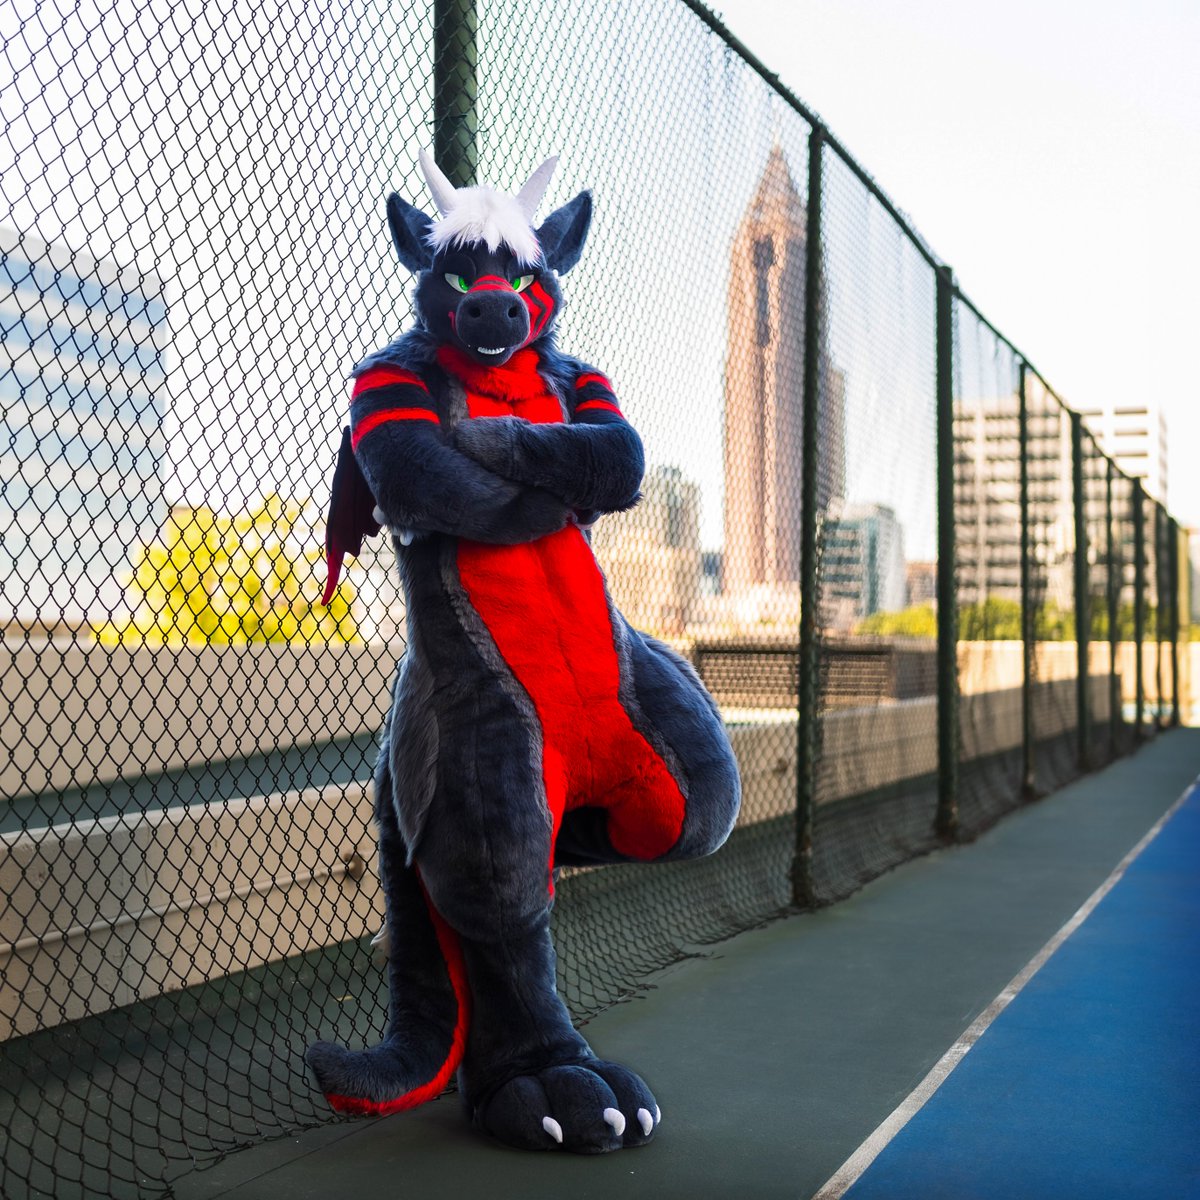 You're in my territory now, wanna test me? ⛓️ 😏 📷: @PoisonedShutter